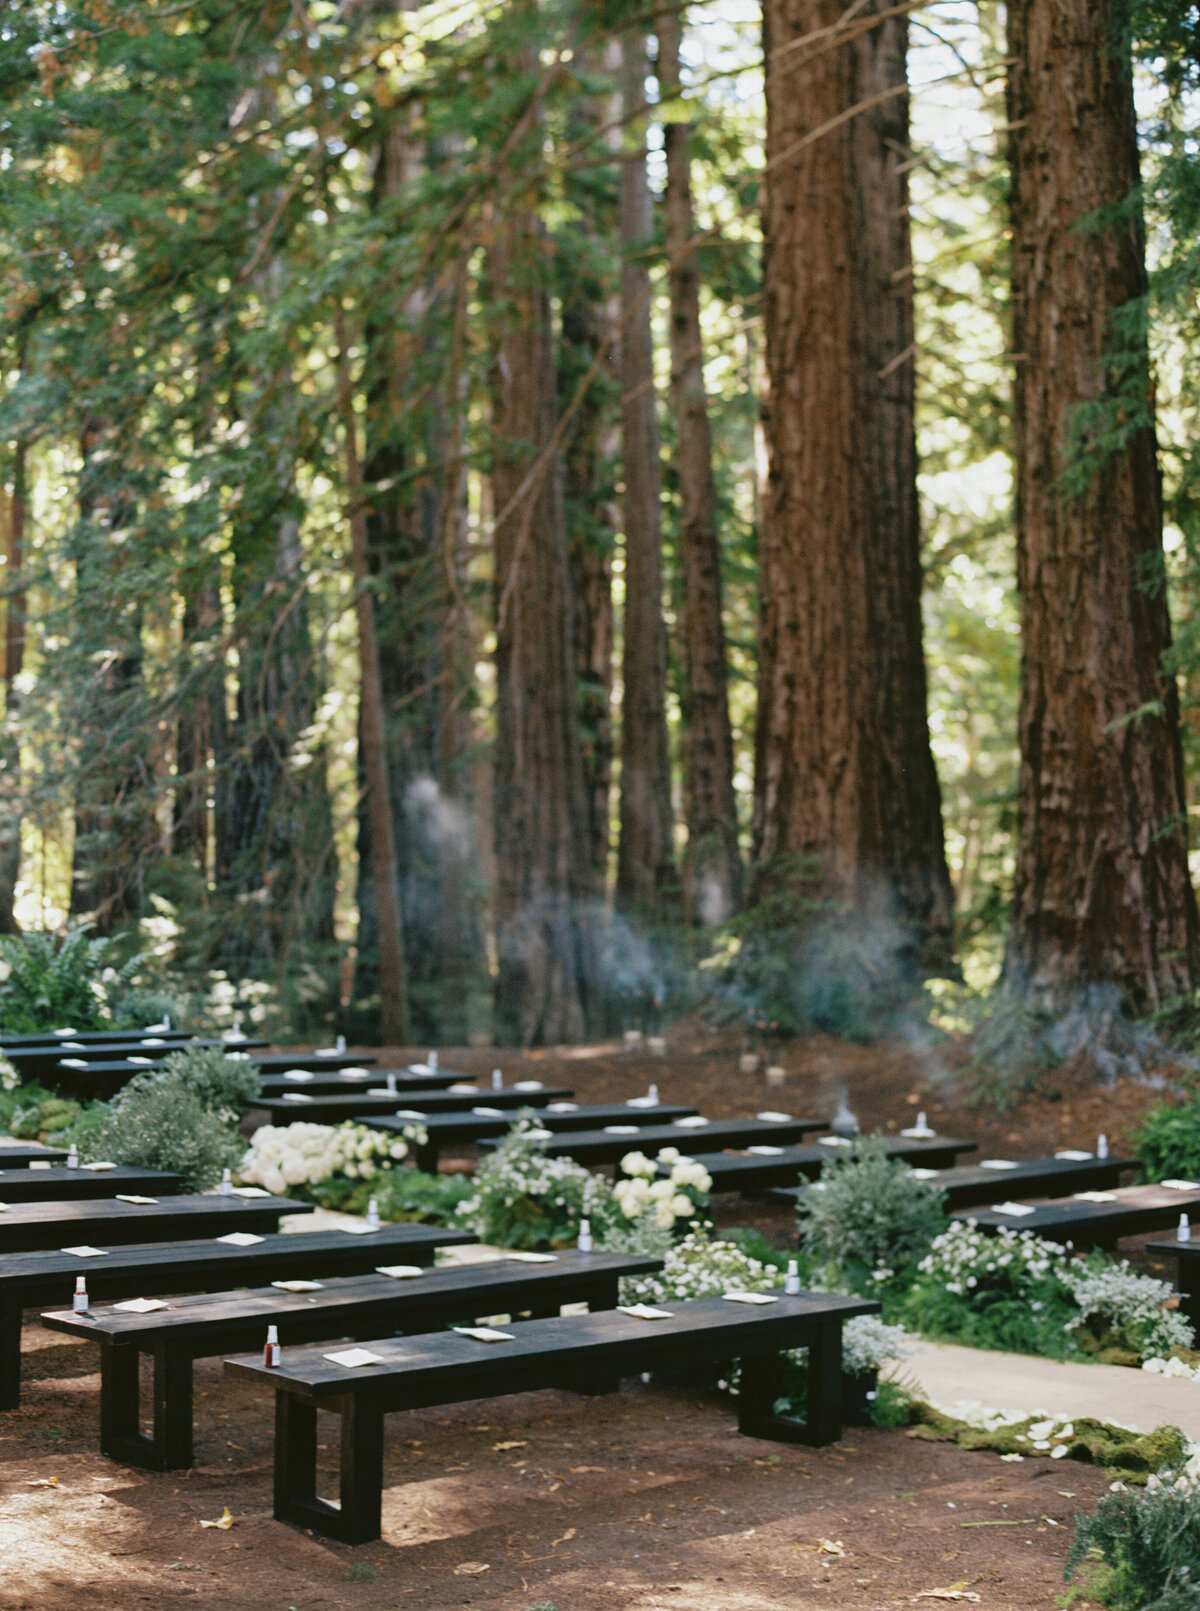 Ceremony with Benches at the Preserve